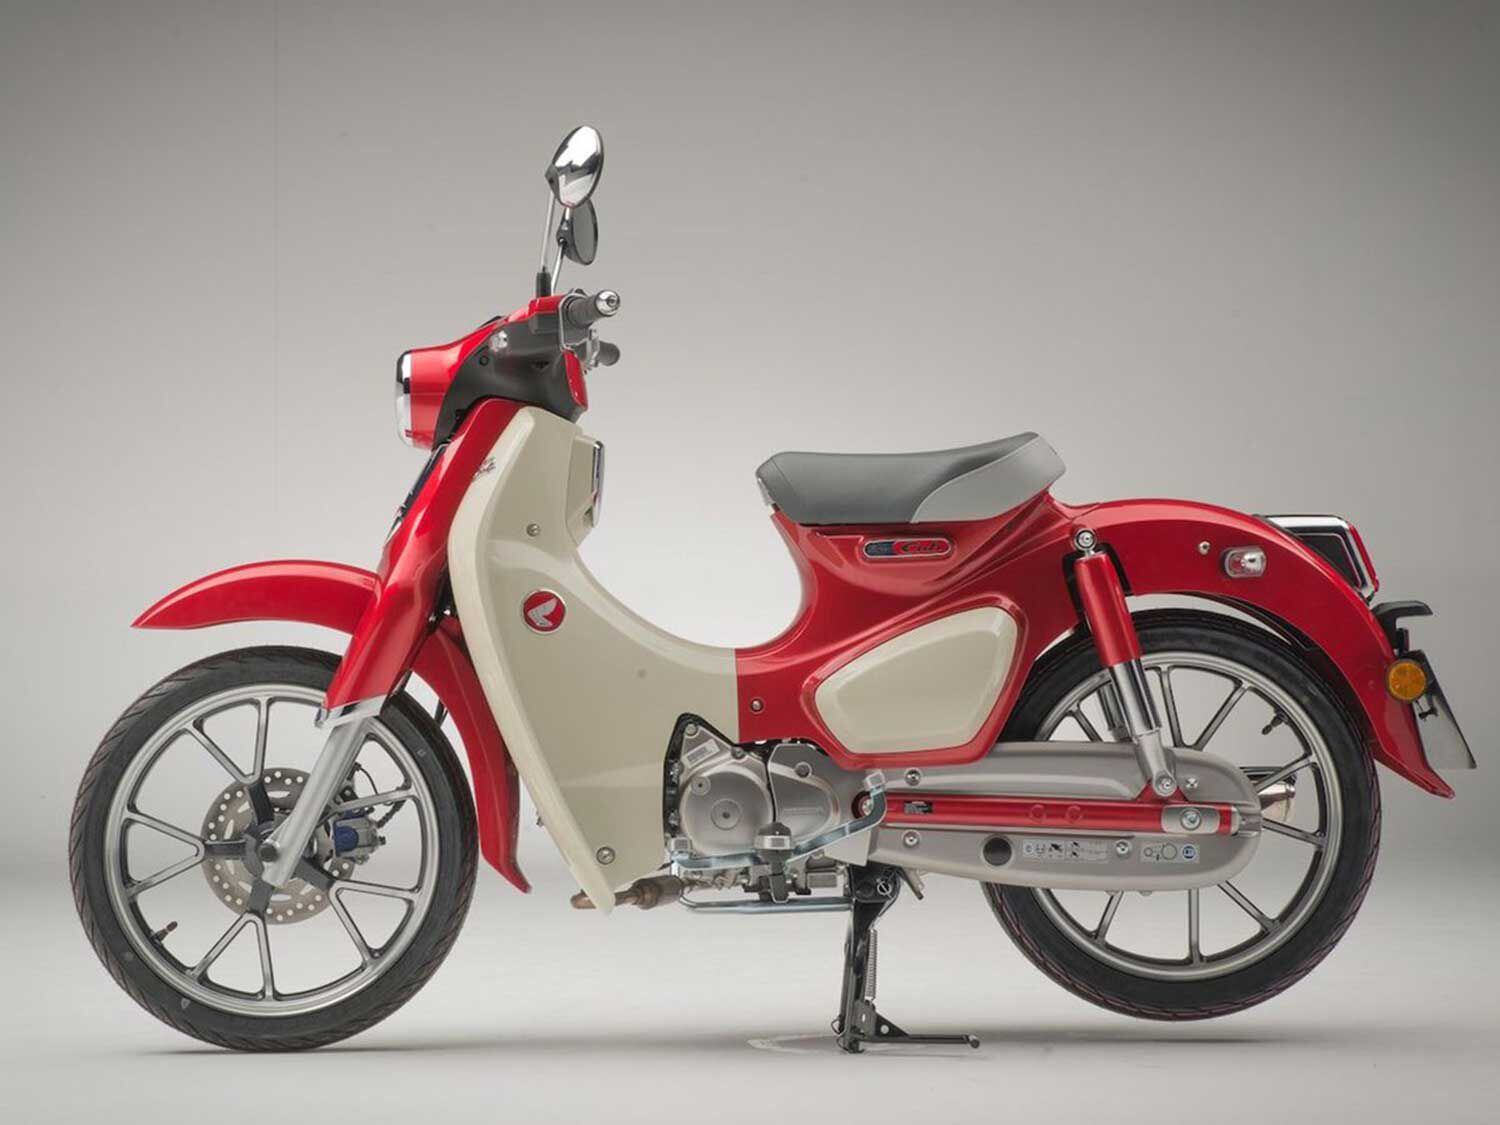 The new generation Super Cub doesn’t look all that different from the original. And the Cub nameplate is the best-selling vehicle of <em>all</em> time!